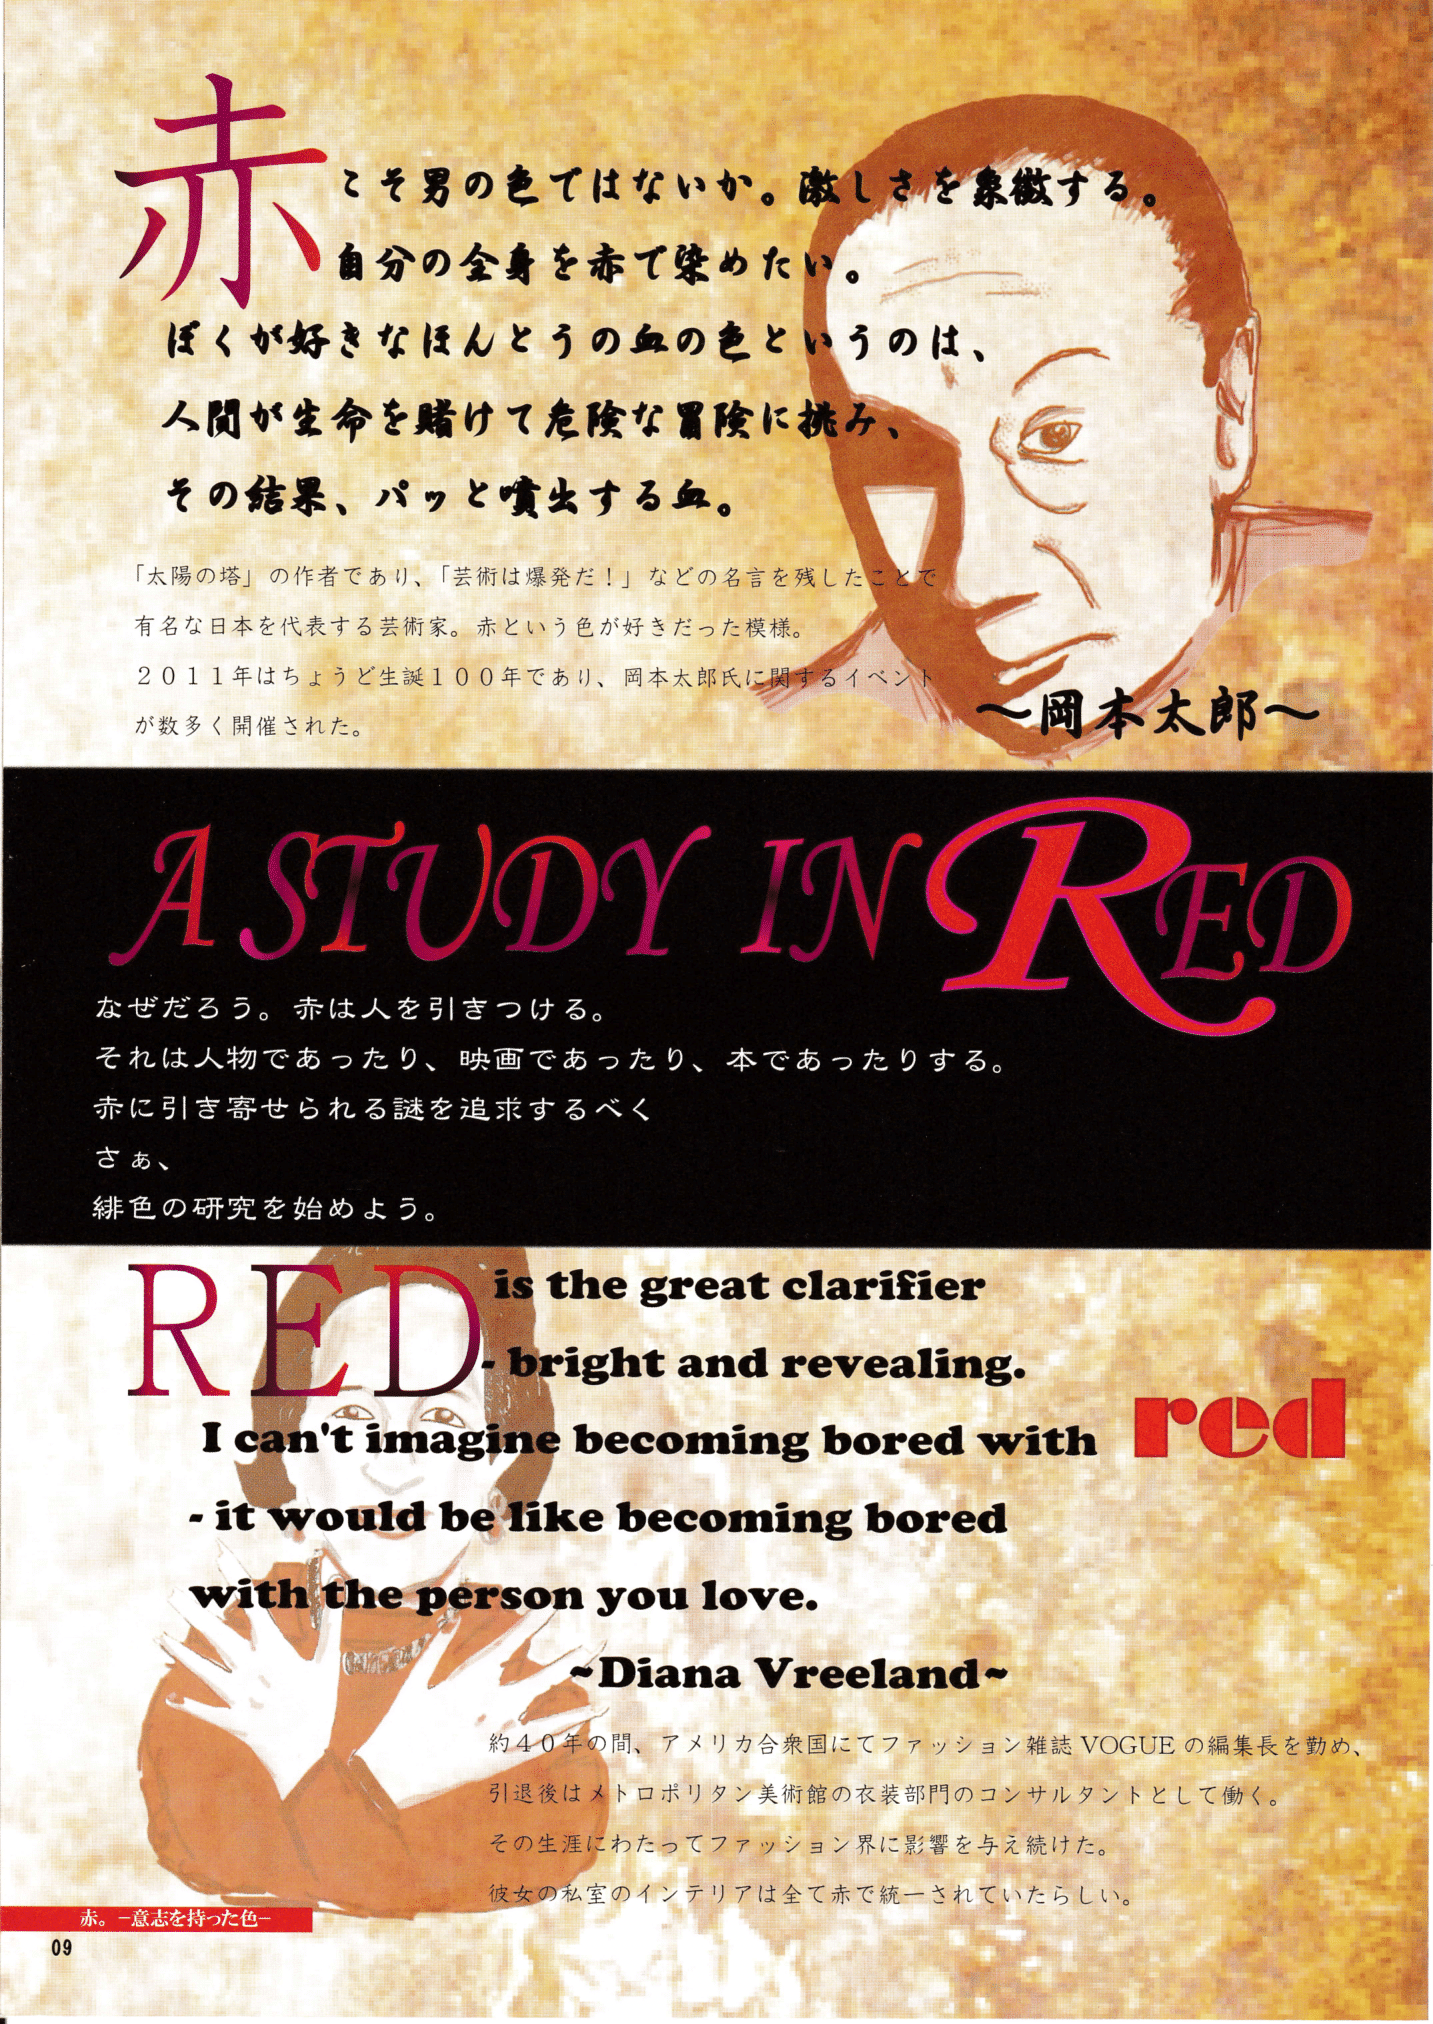 P 09 A Study In Red 1 アリオーゾweb